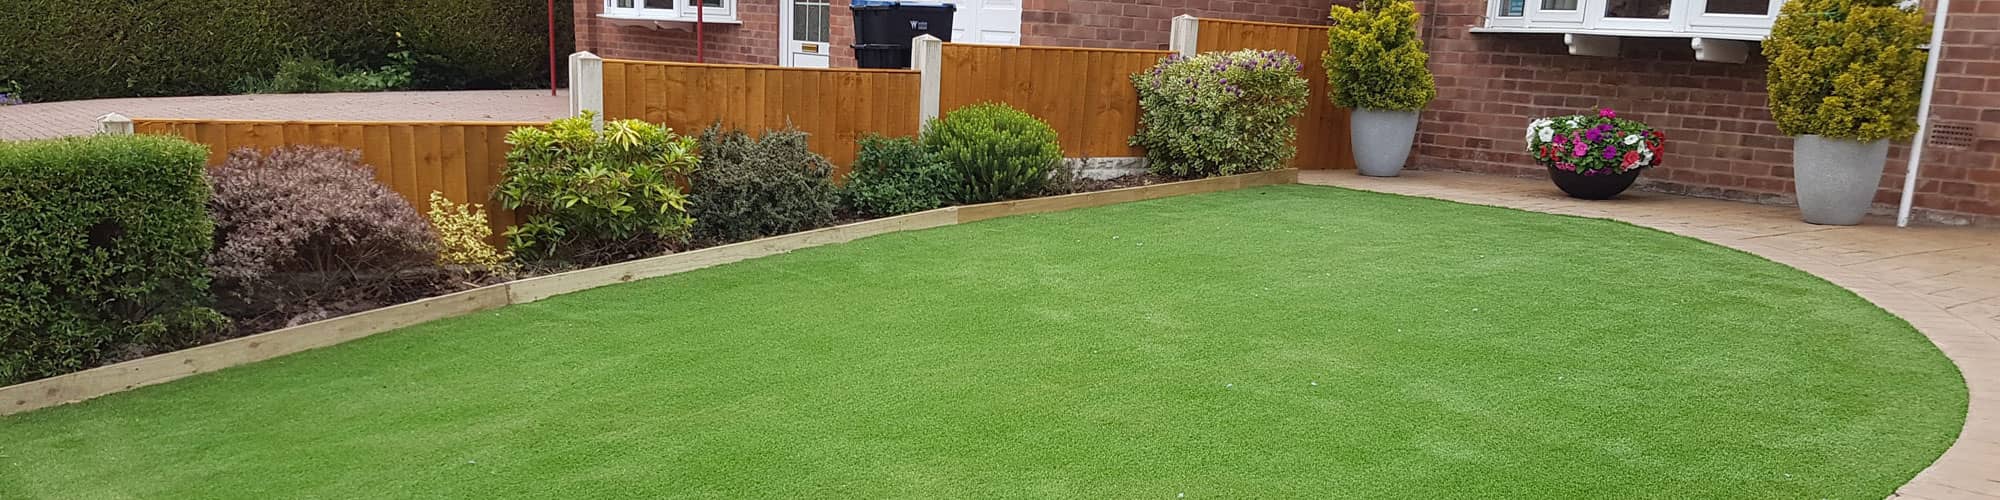 Artificial grass installed at front garden of Wrexham property